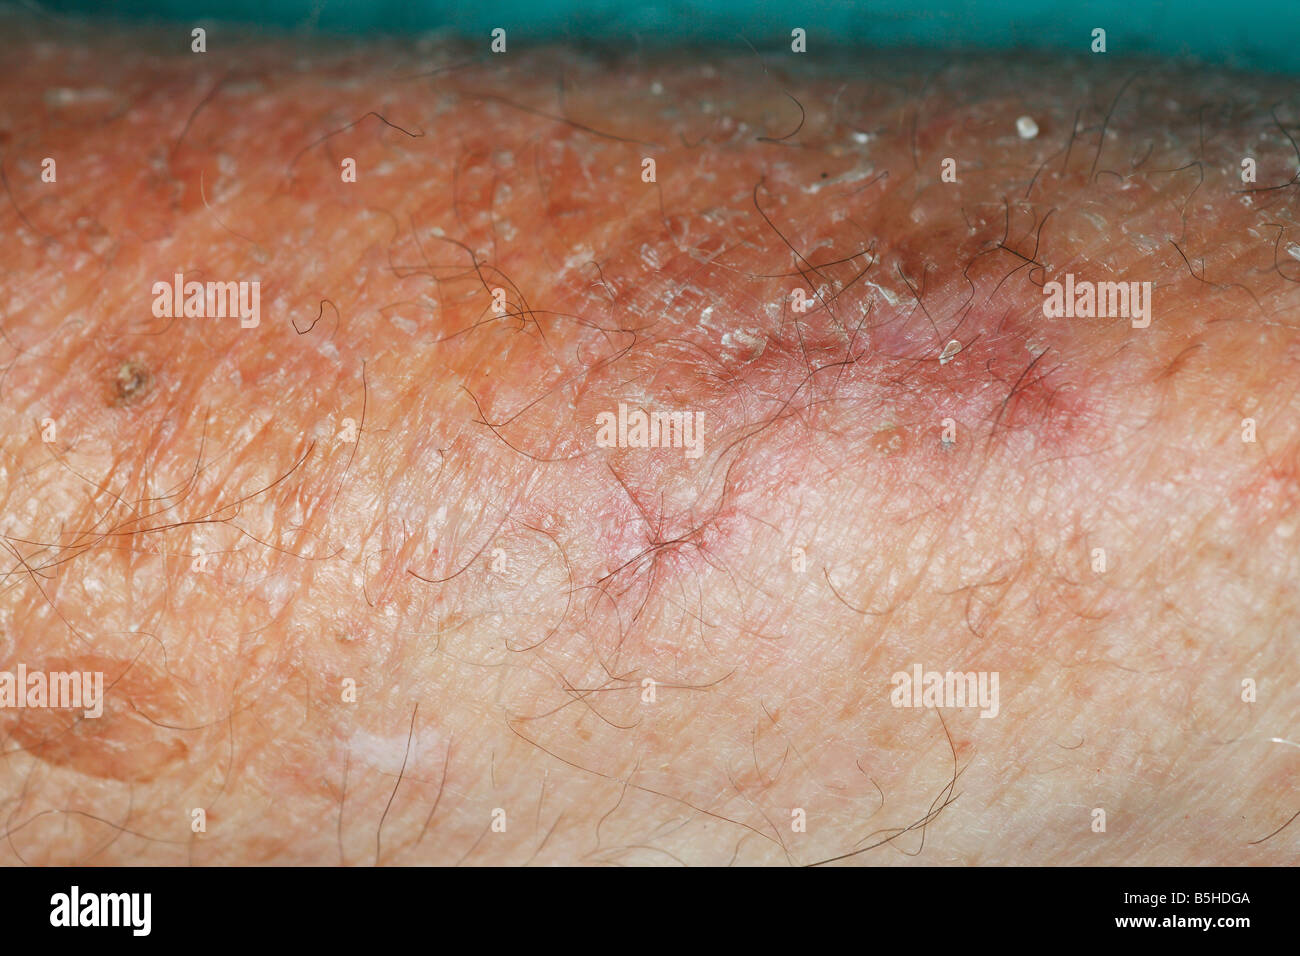 skin thinning or atrophy on an elderly man's arm Stock Photo